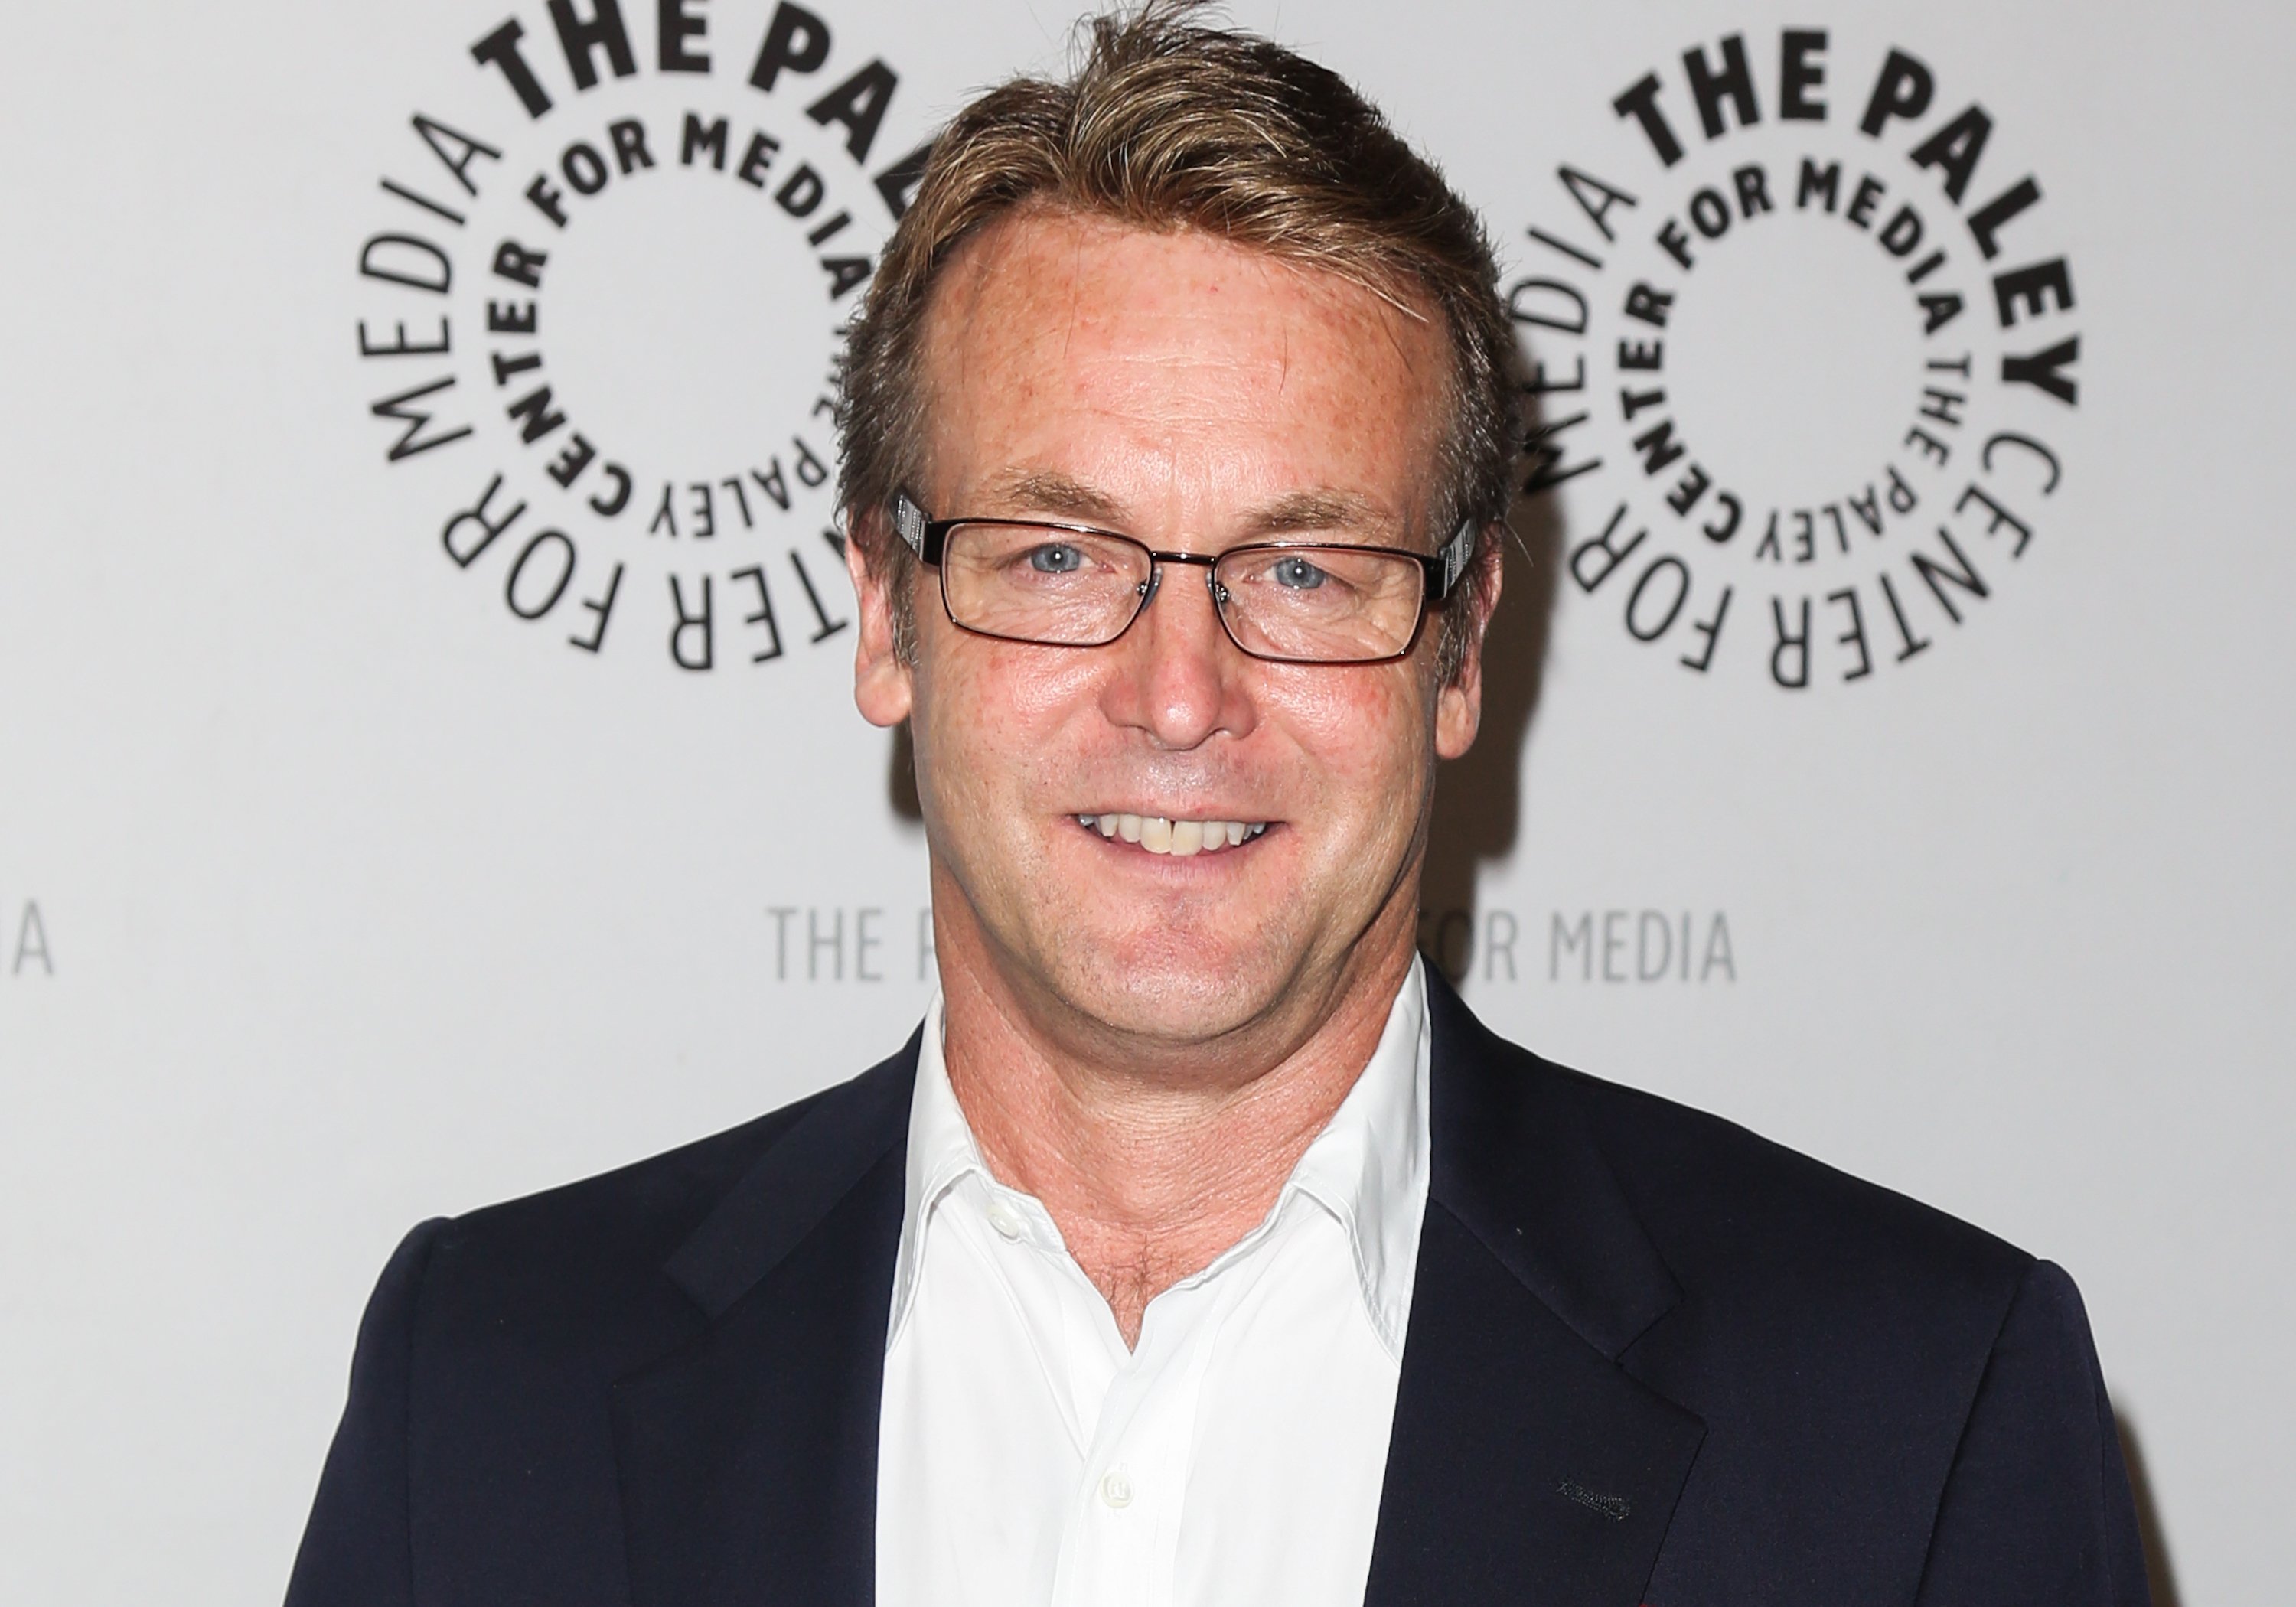 'The Young and the Restless' actor Doug Davidson in a white shirt, black jacket, and glasses, smiling for the camera.